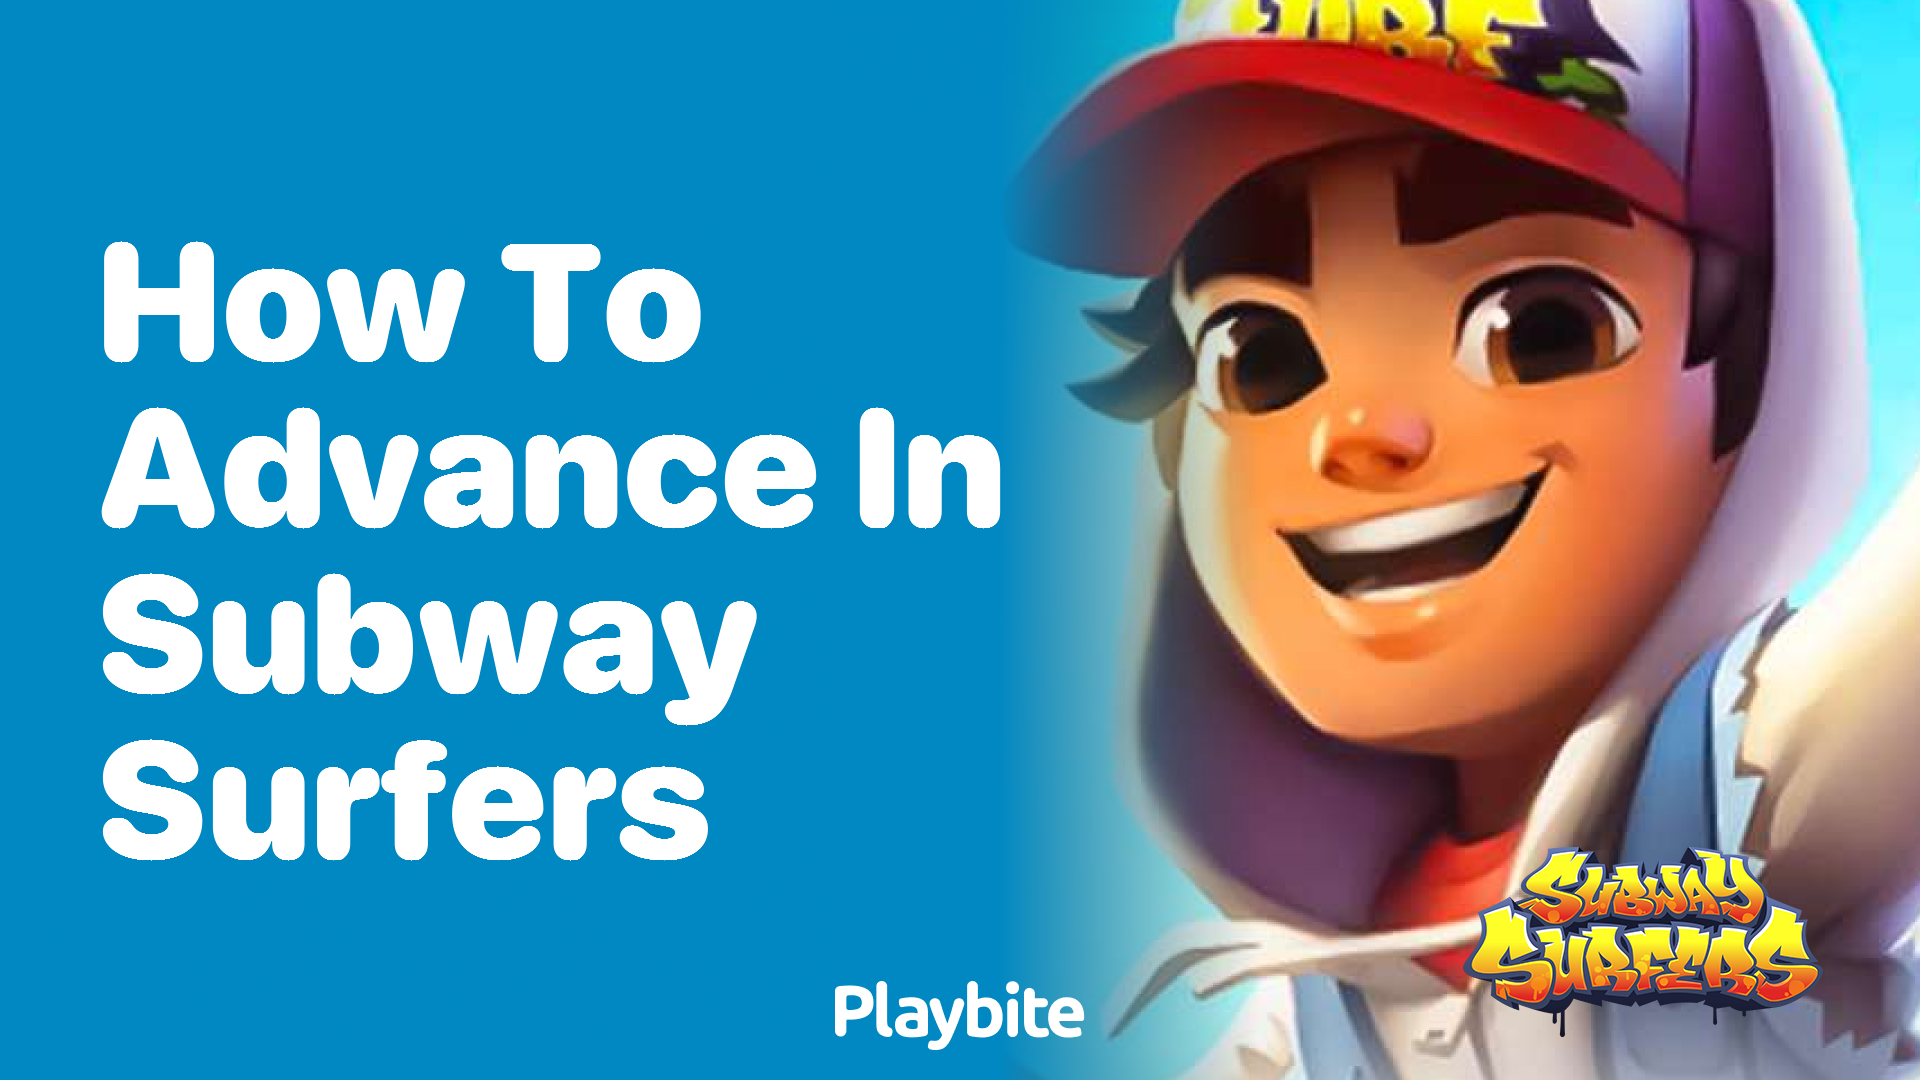 How to Advance in Subway Surfers